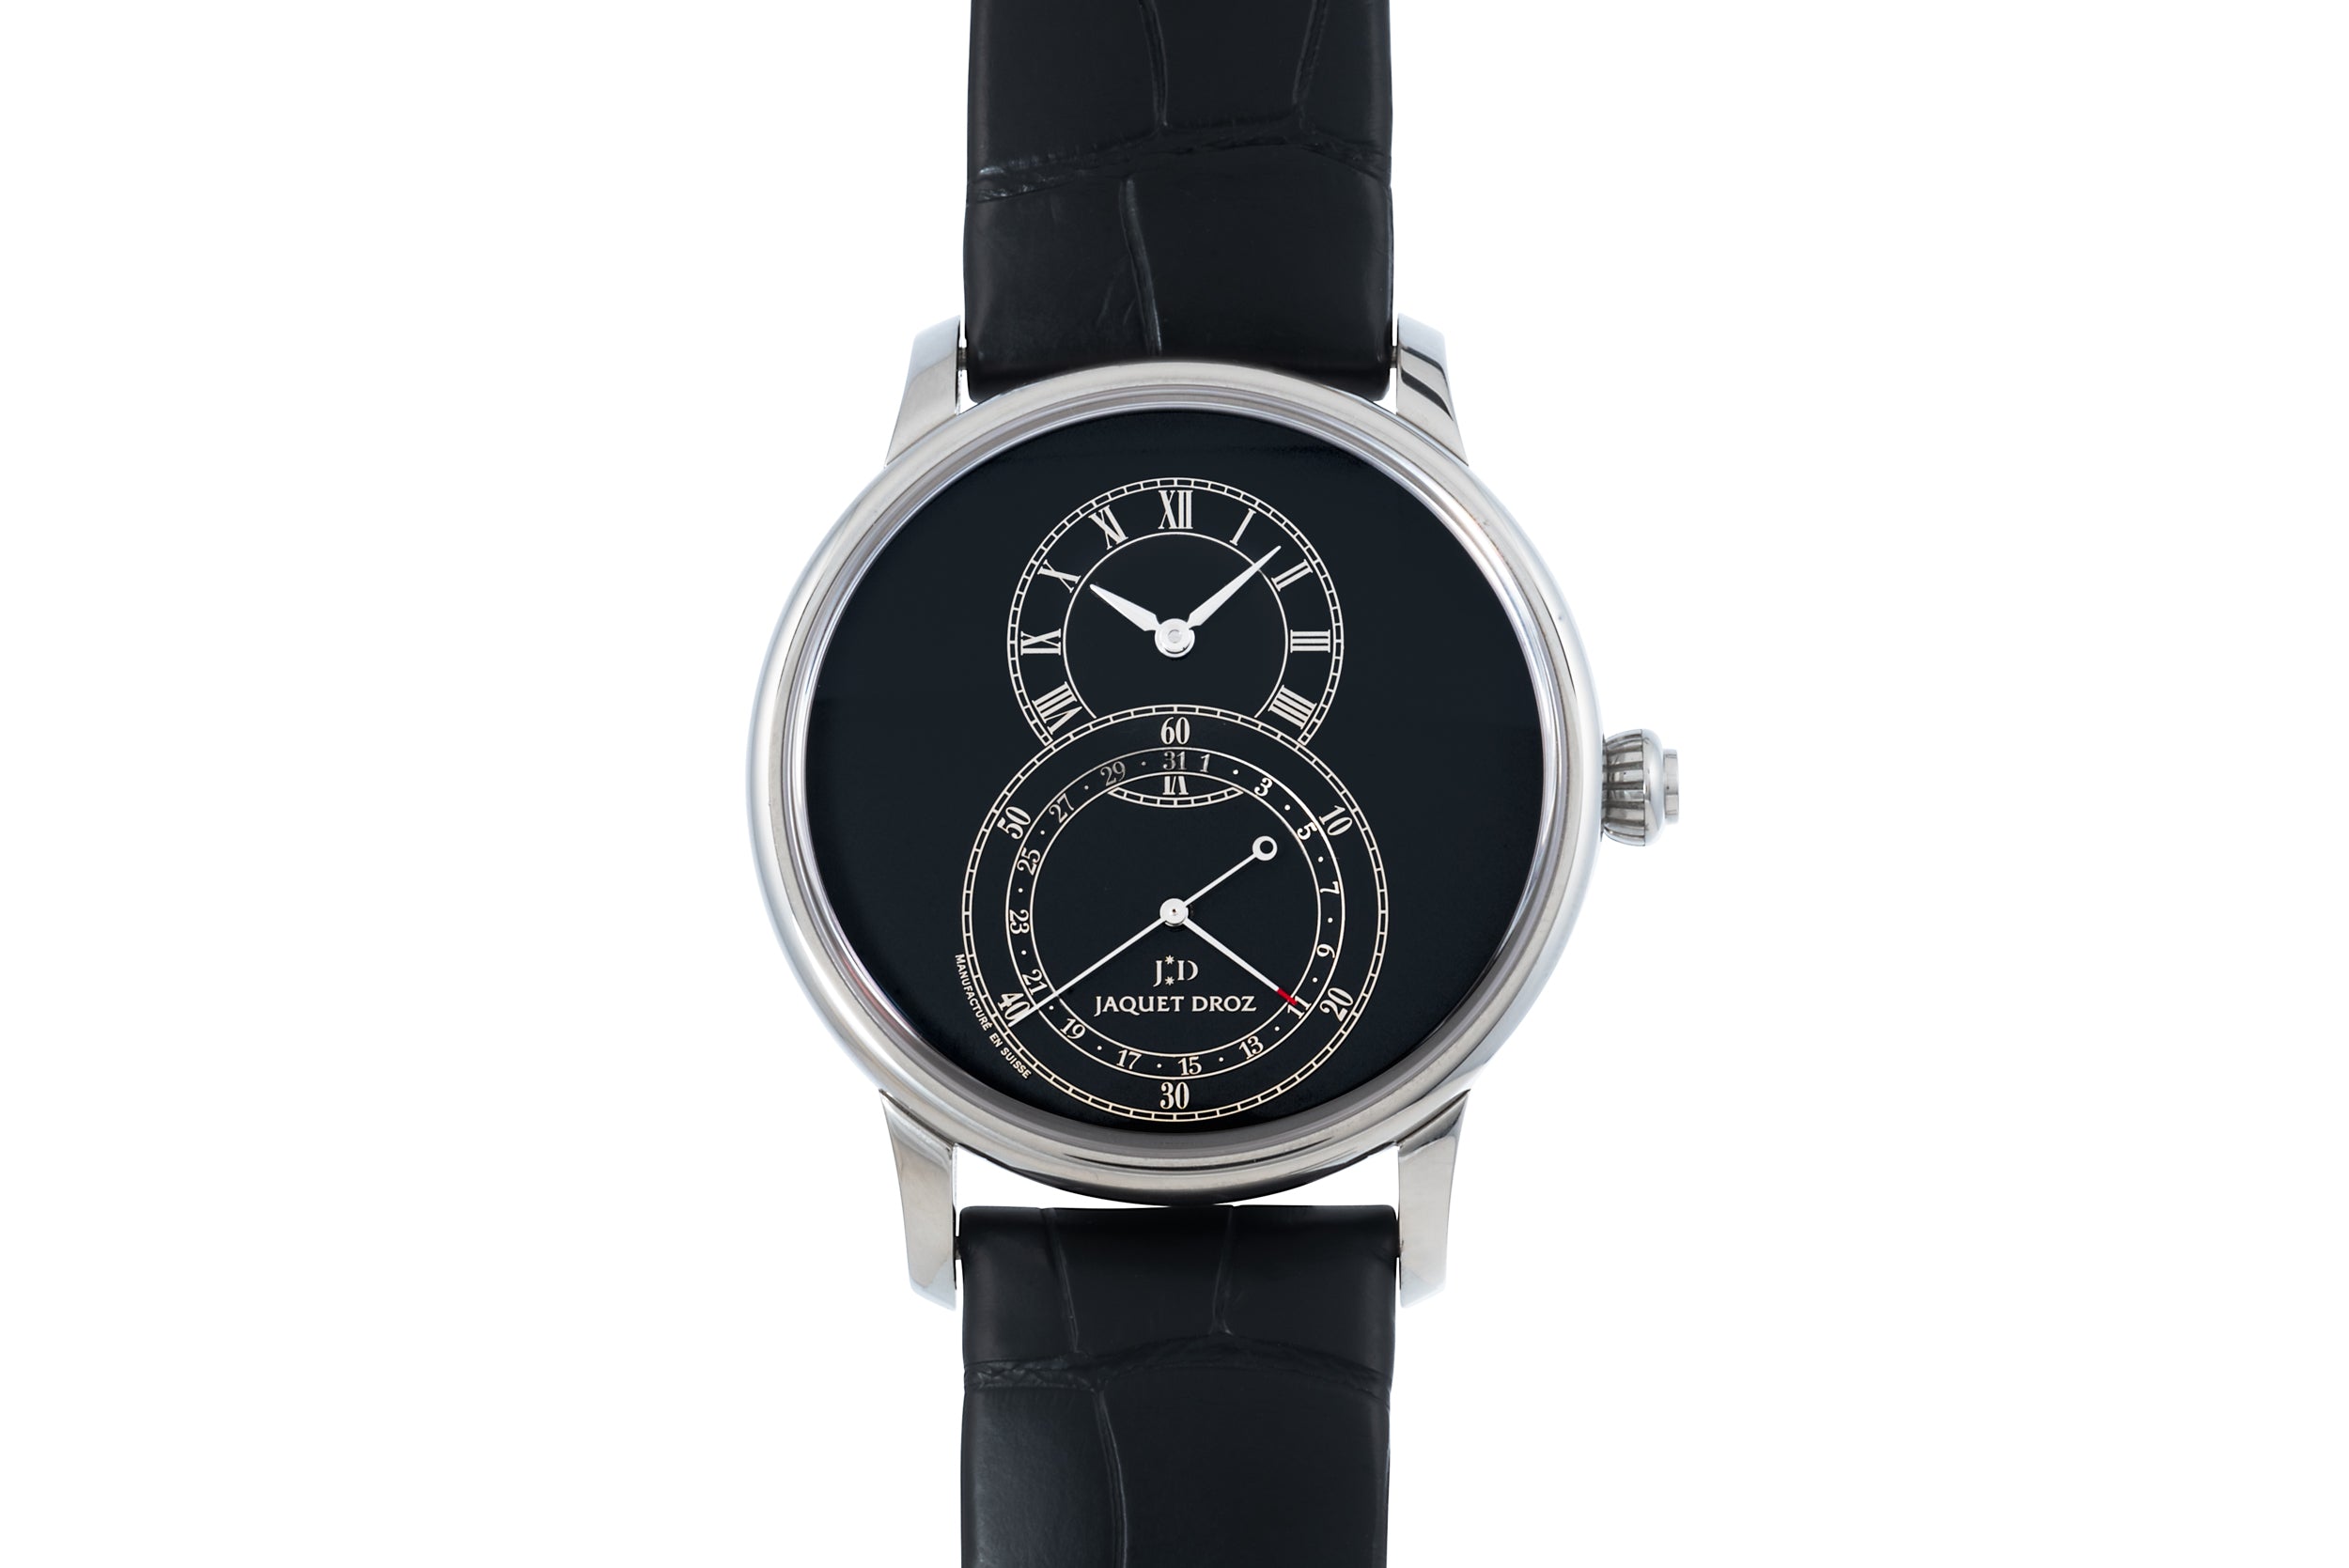 Jaquet Droz Bird Repeater 300th Anniversary - Exquisite Timepieces